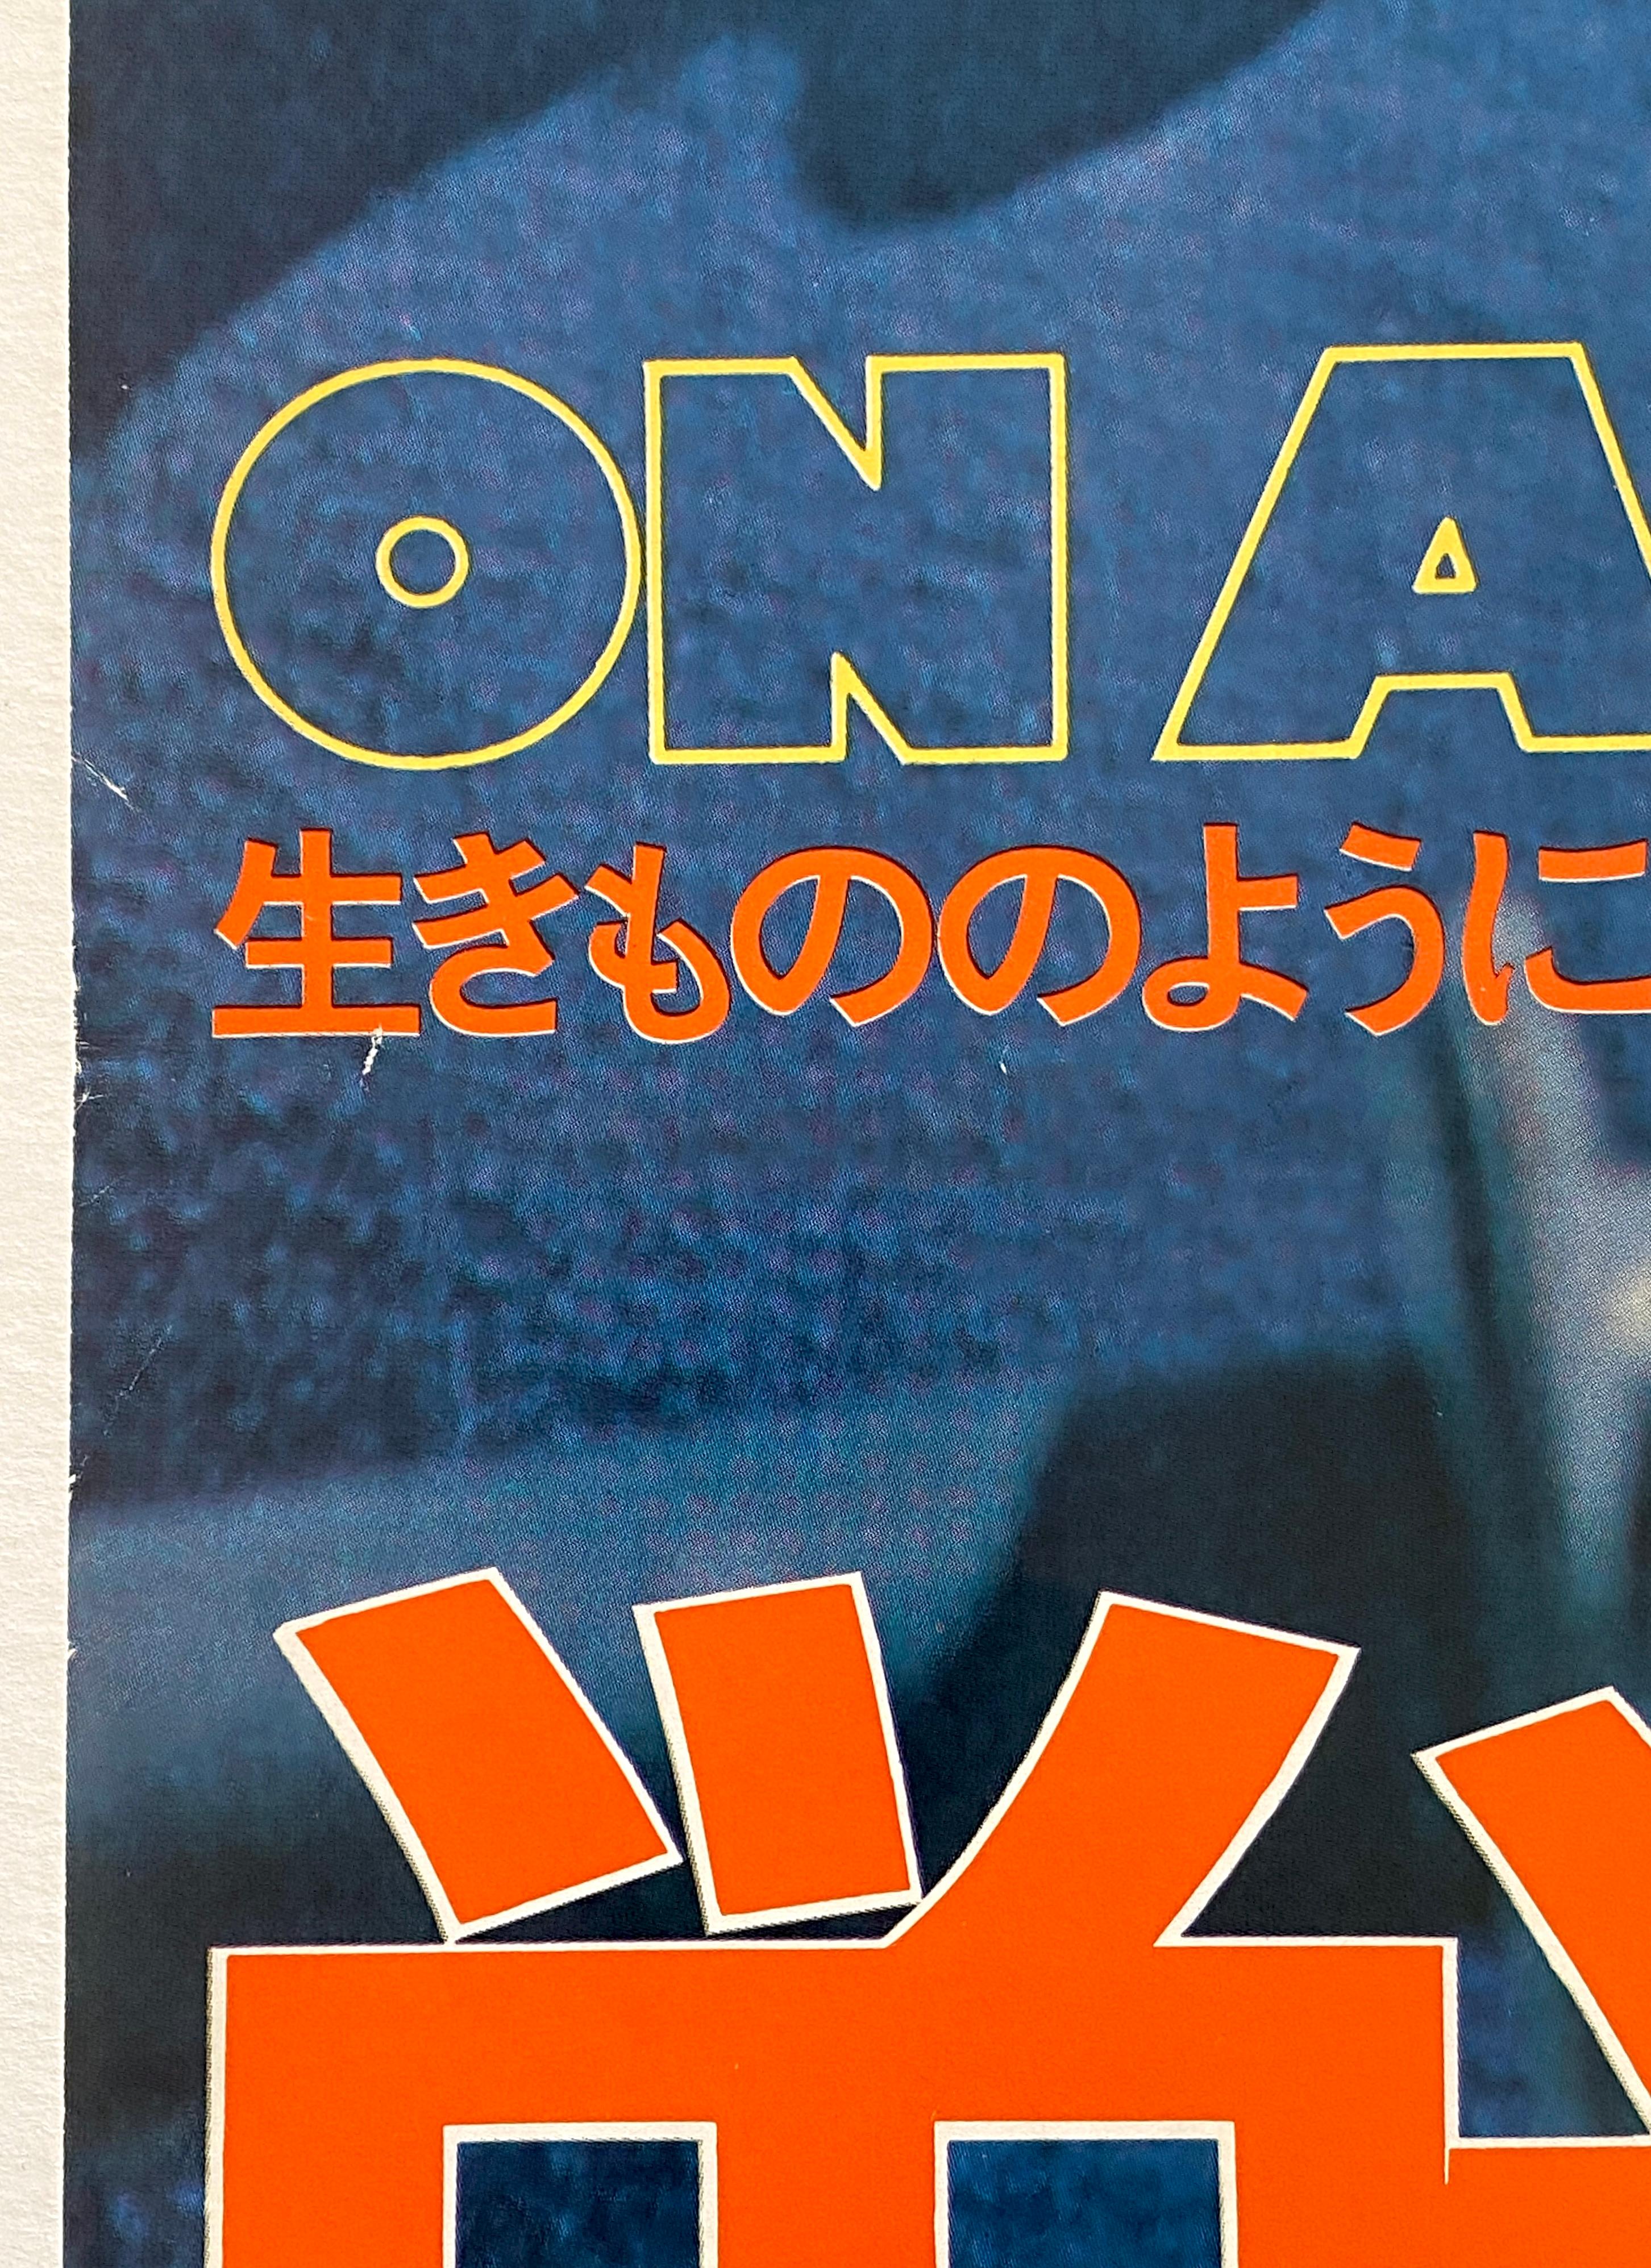 Steve McQueen 'On Any Sunday' Original Vintage Japanese B2 Movie Poster, 1972 For Sale 2